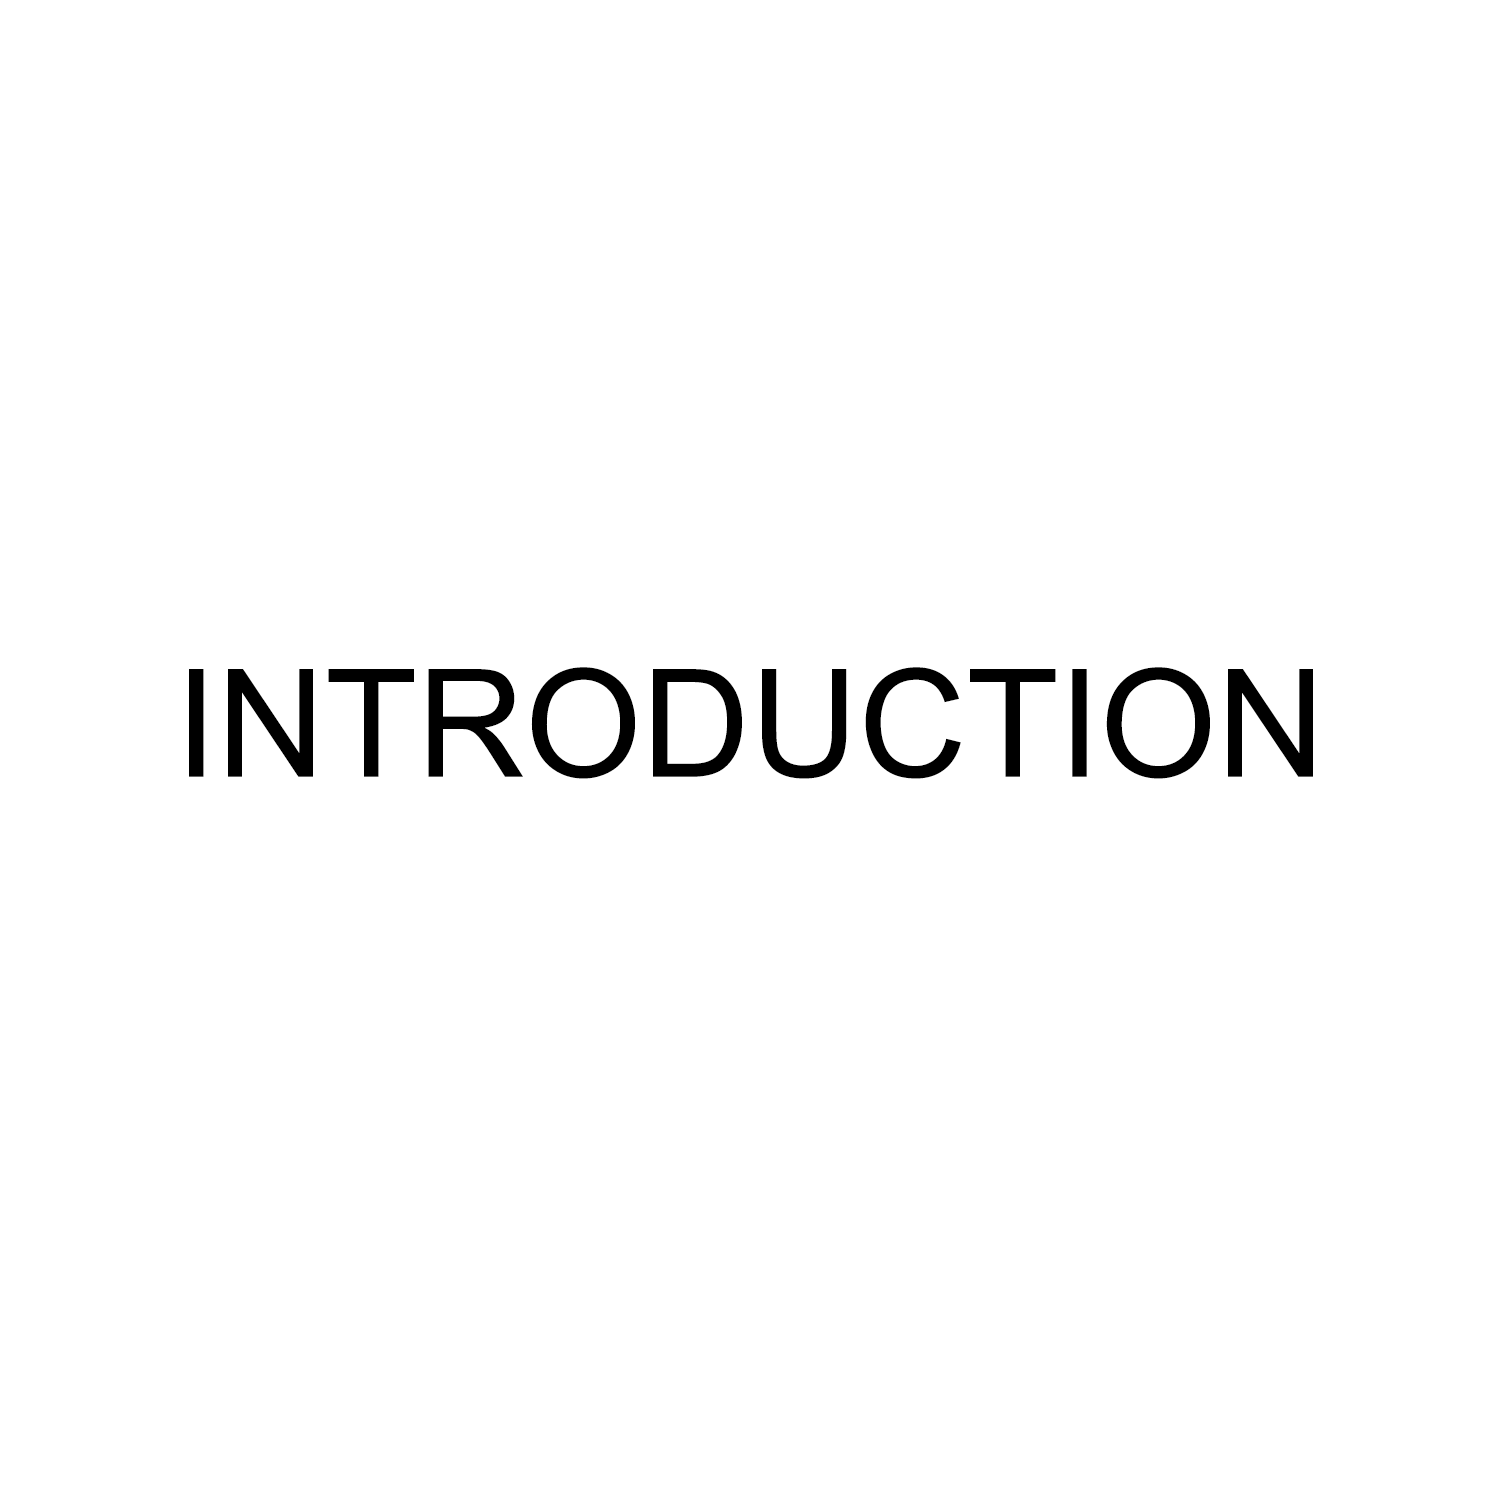 Introduction button